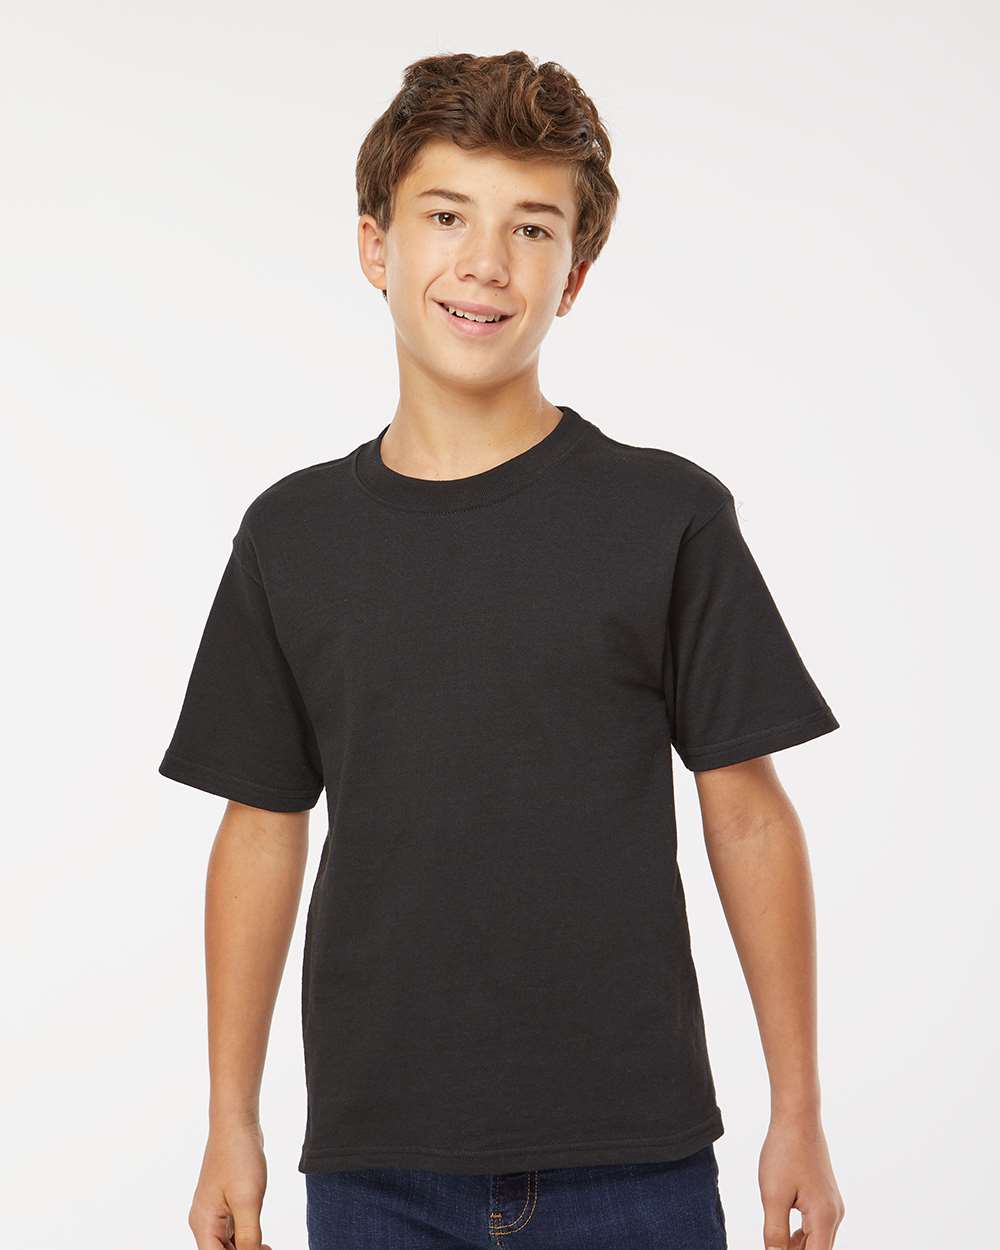 Pretreated M&O 4850 Youth Gold Soft Touch T-Shirt